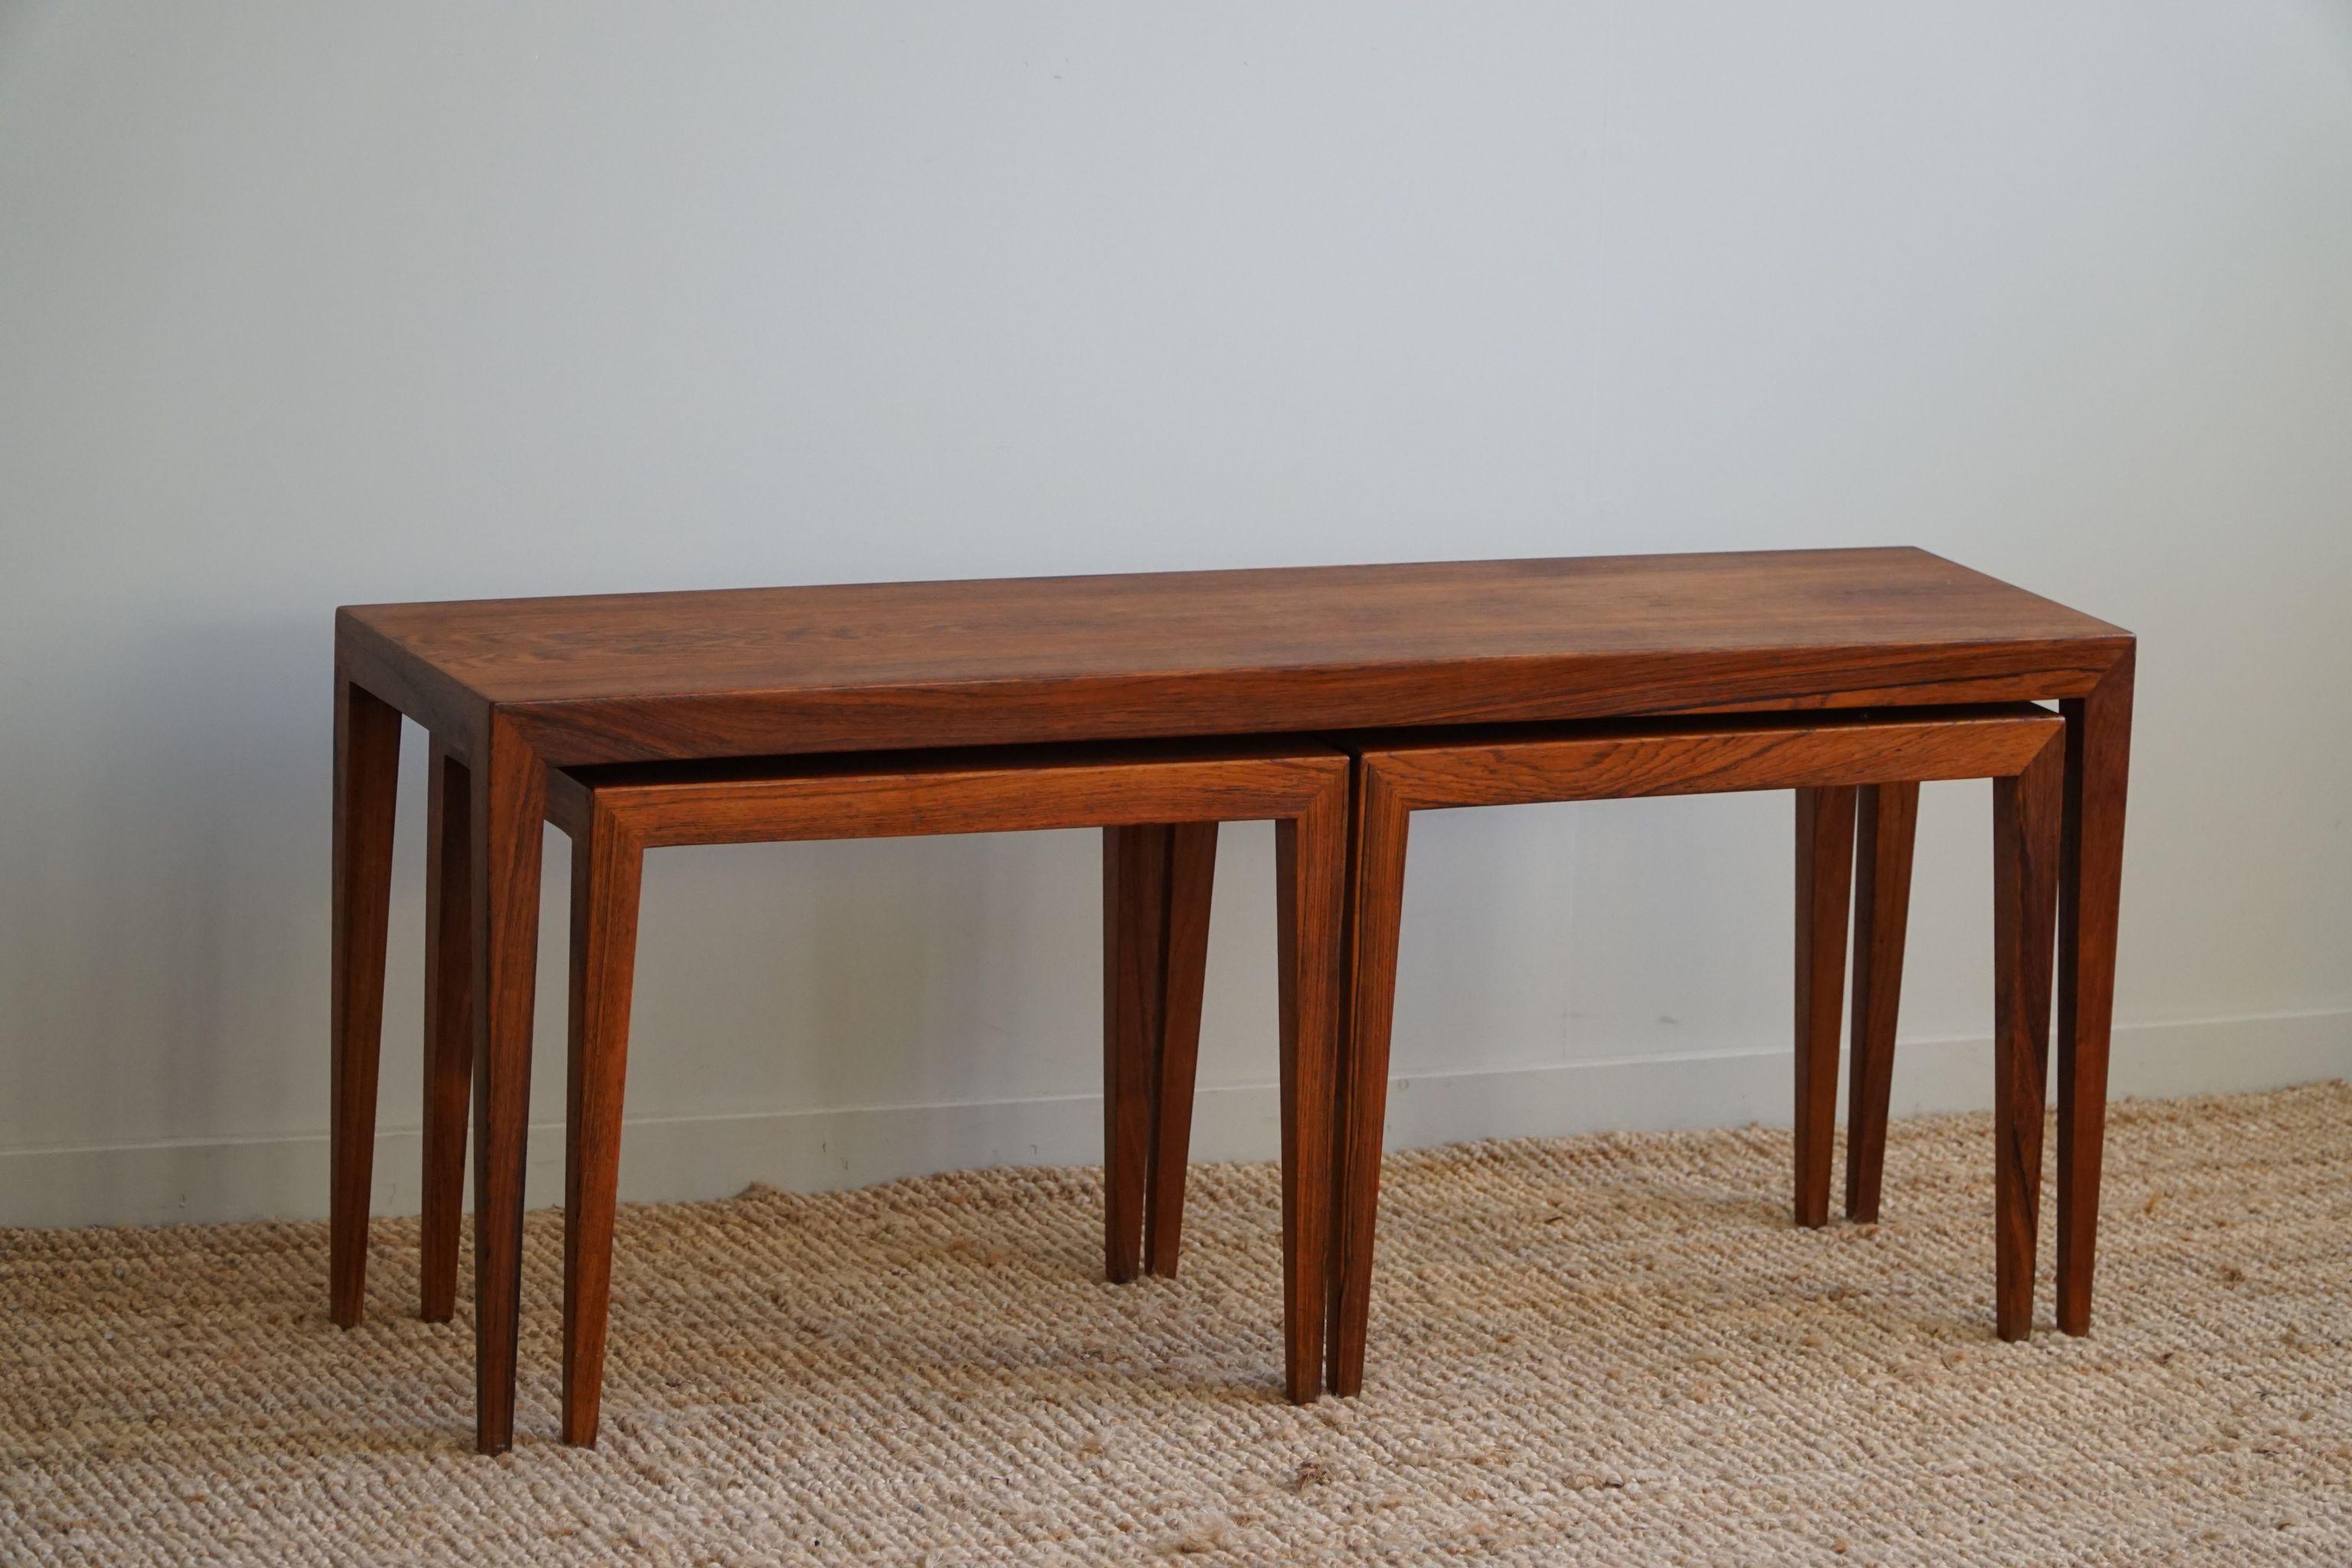 A set of 3 nesting tables in Brazilian Rosewood, designed by Danish designer Severin Hansen Jr for Haslev. The tables are restored and therefore in a great condition. 

These beautiful tables will complement many interior styles. A modern,